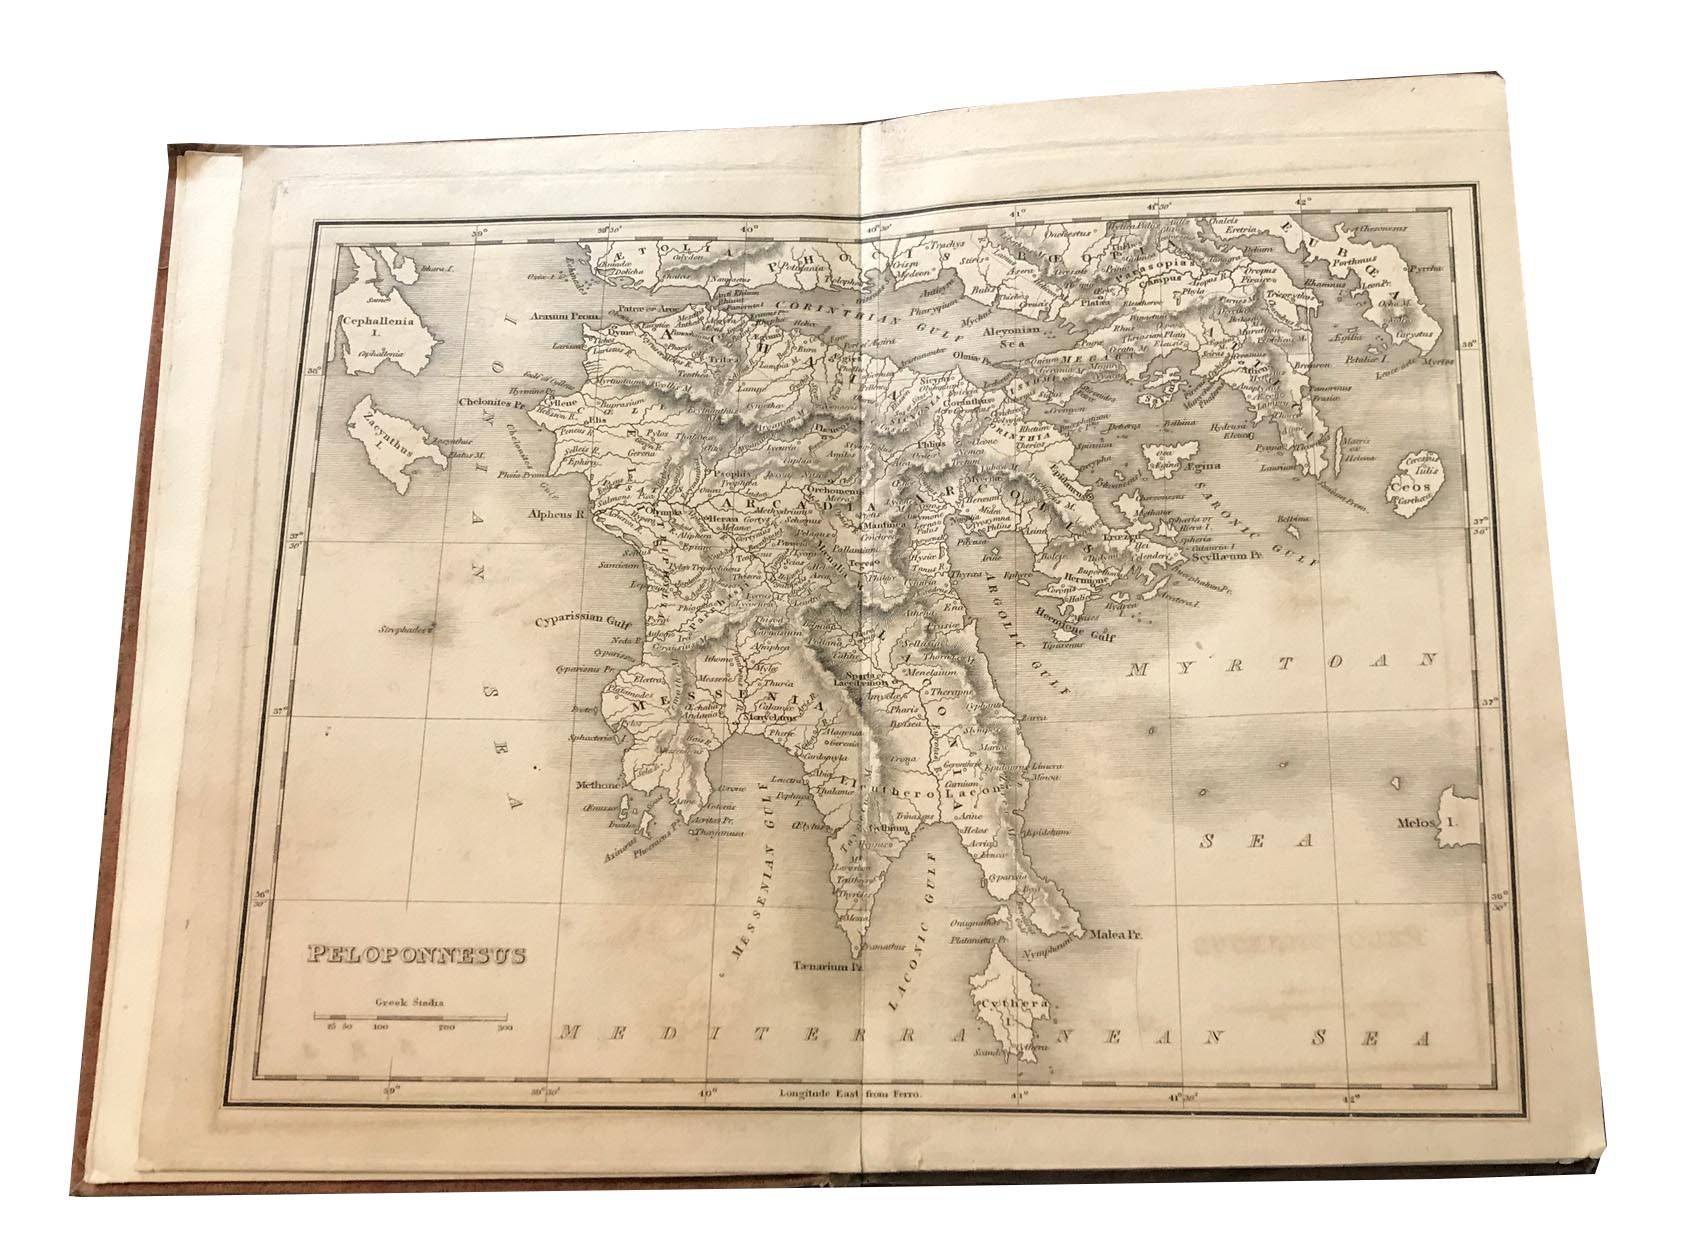 MAPS AND PLANS ILLUSTRATIVE OF HERODOTUS.